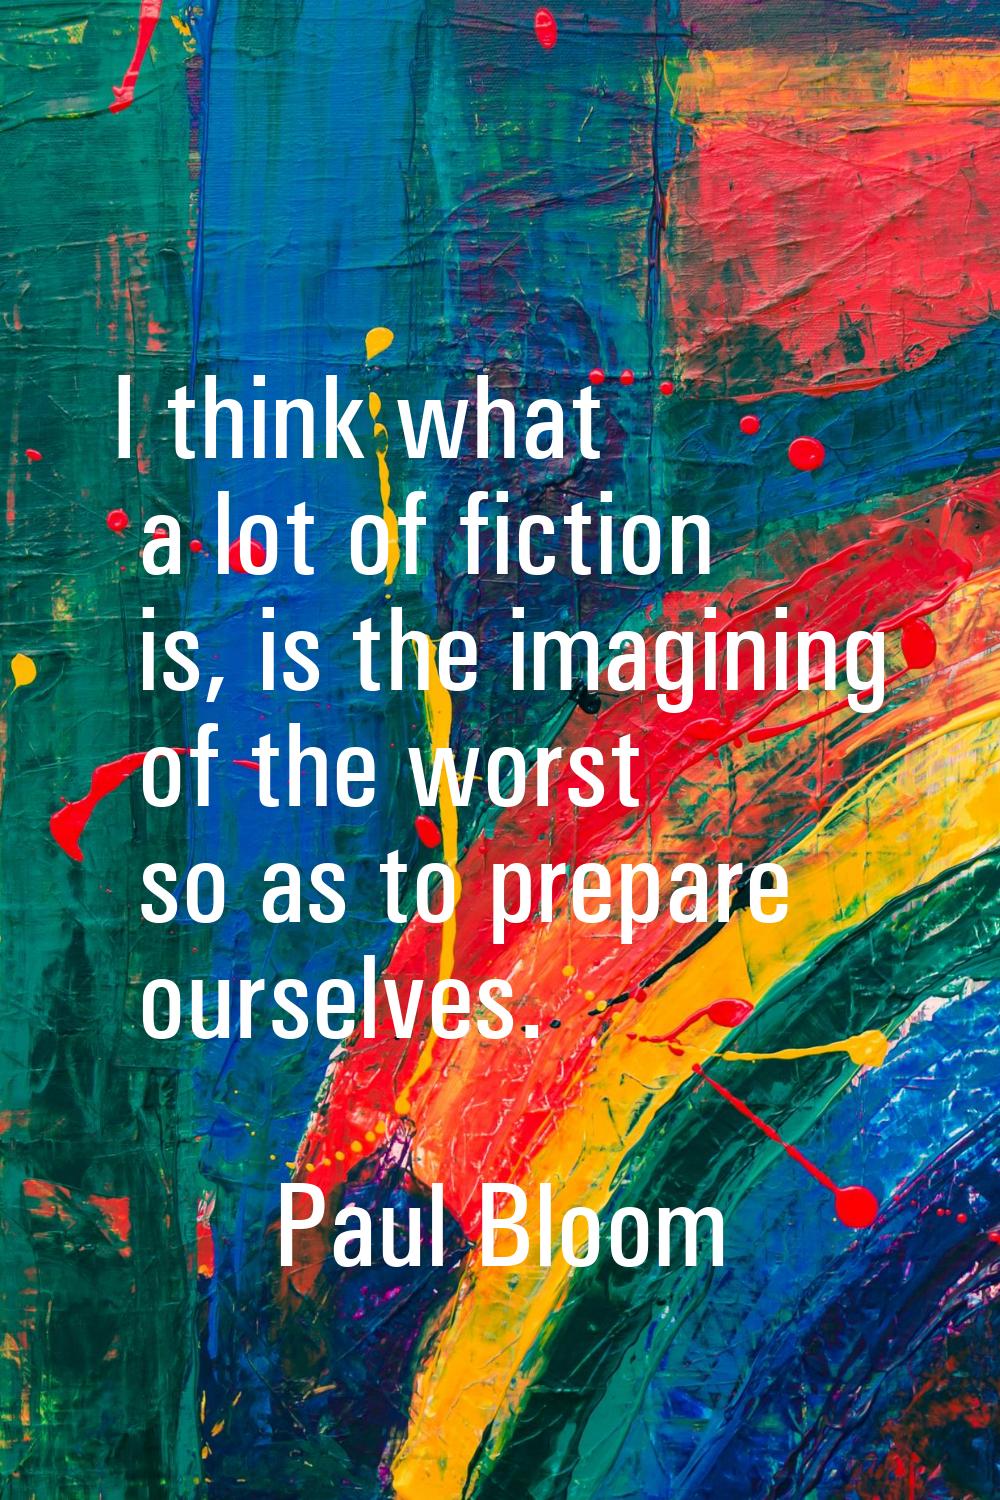 I think what a lot of fiction is, is the imagining of the worst so as to prepare ourselves.